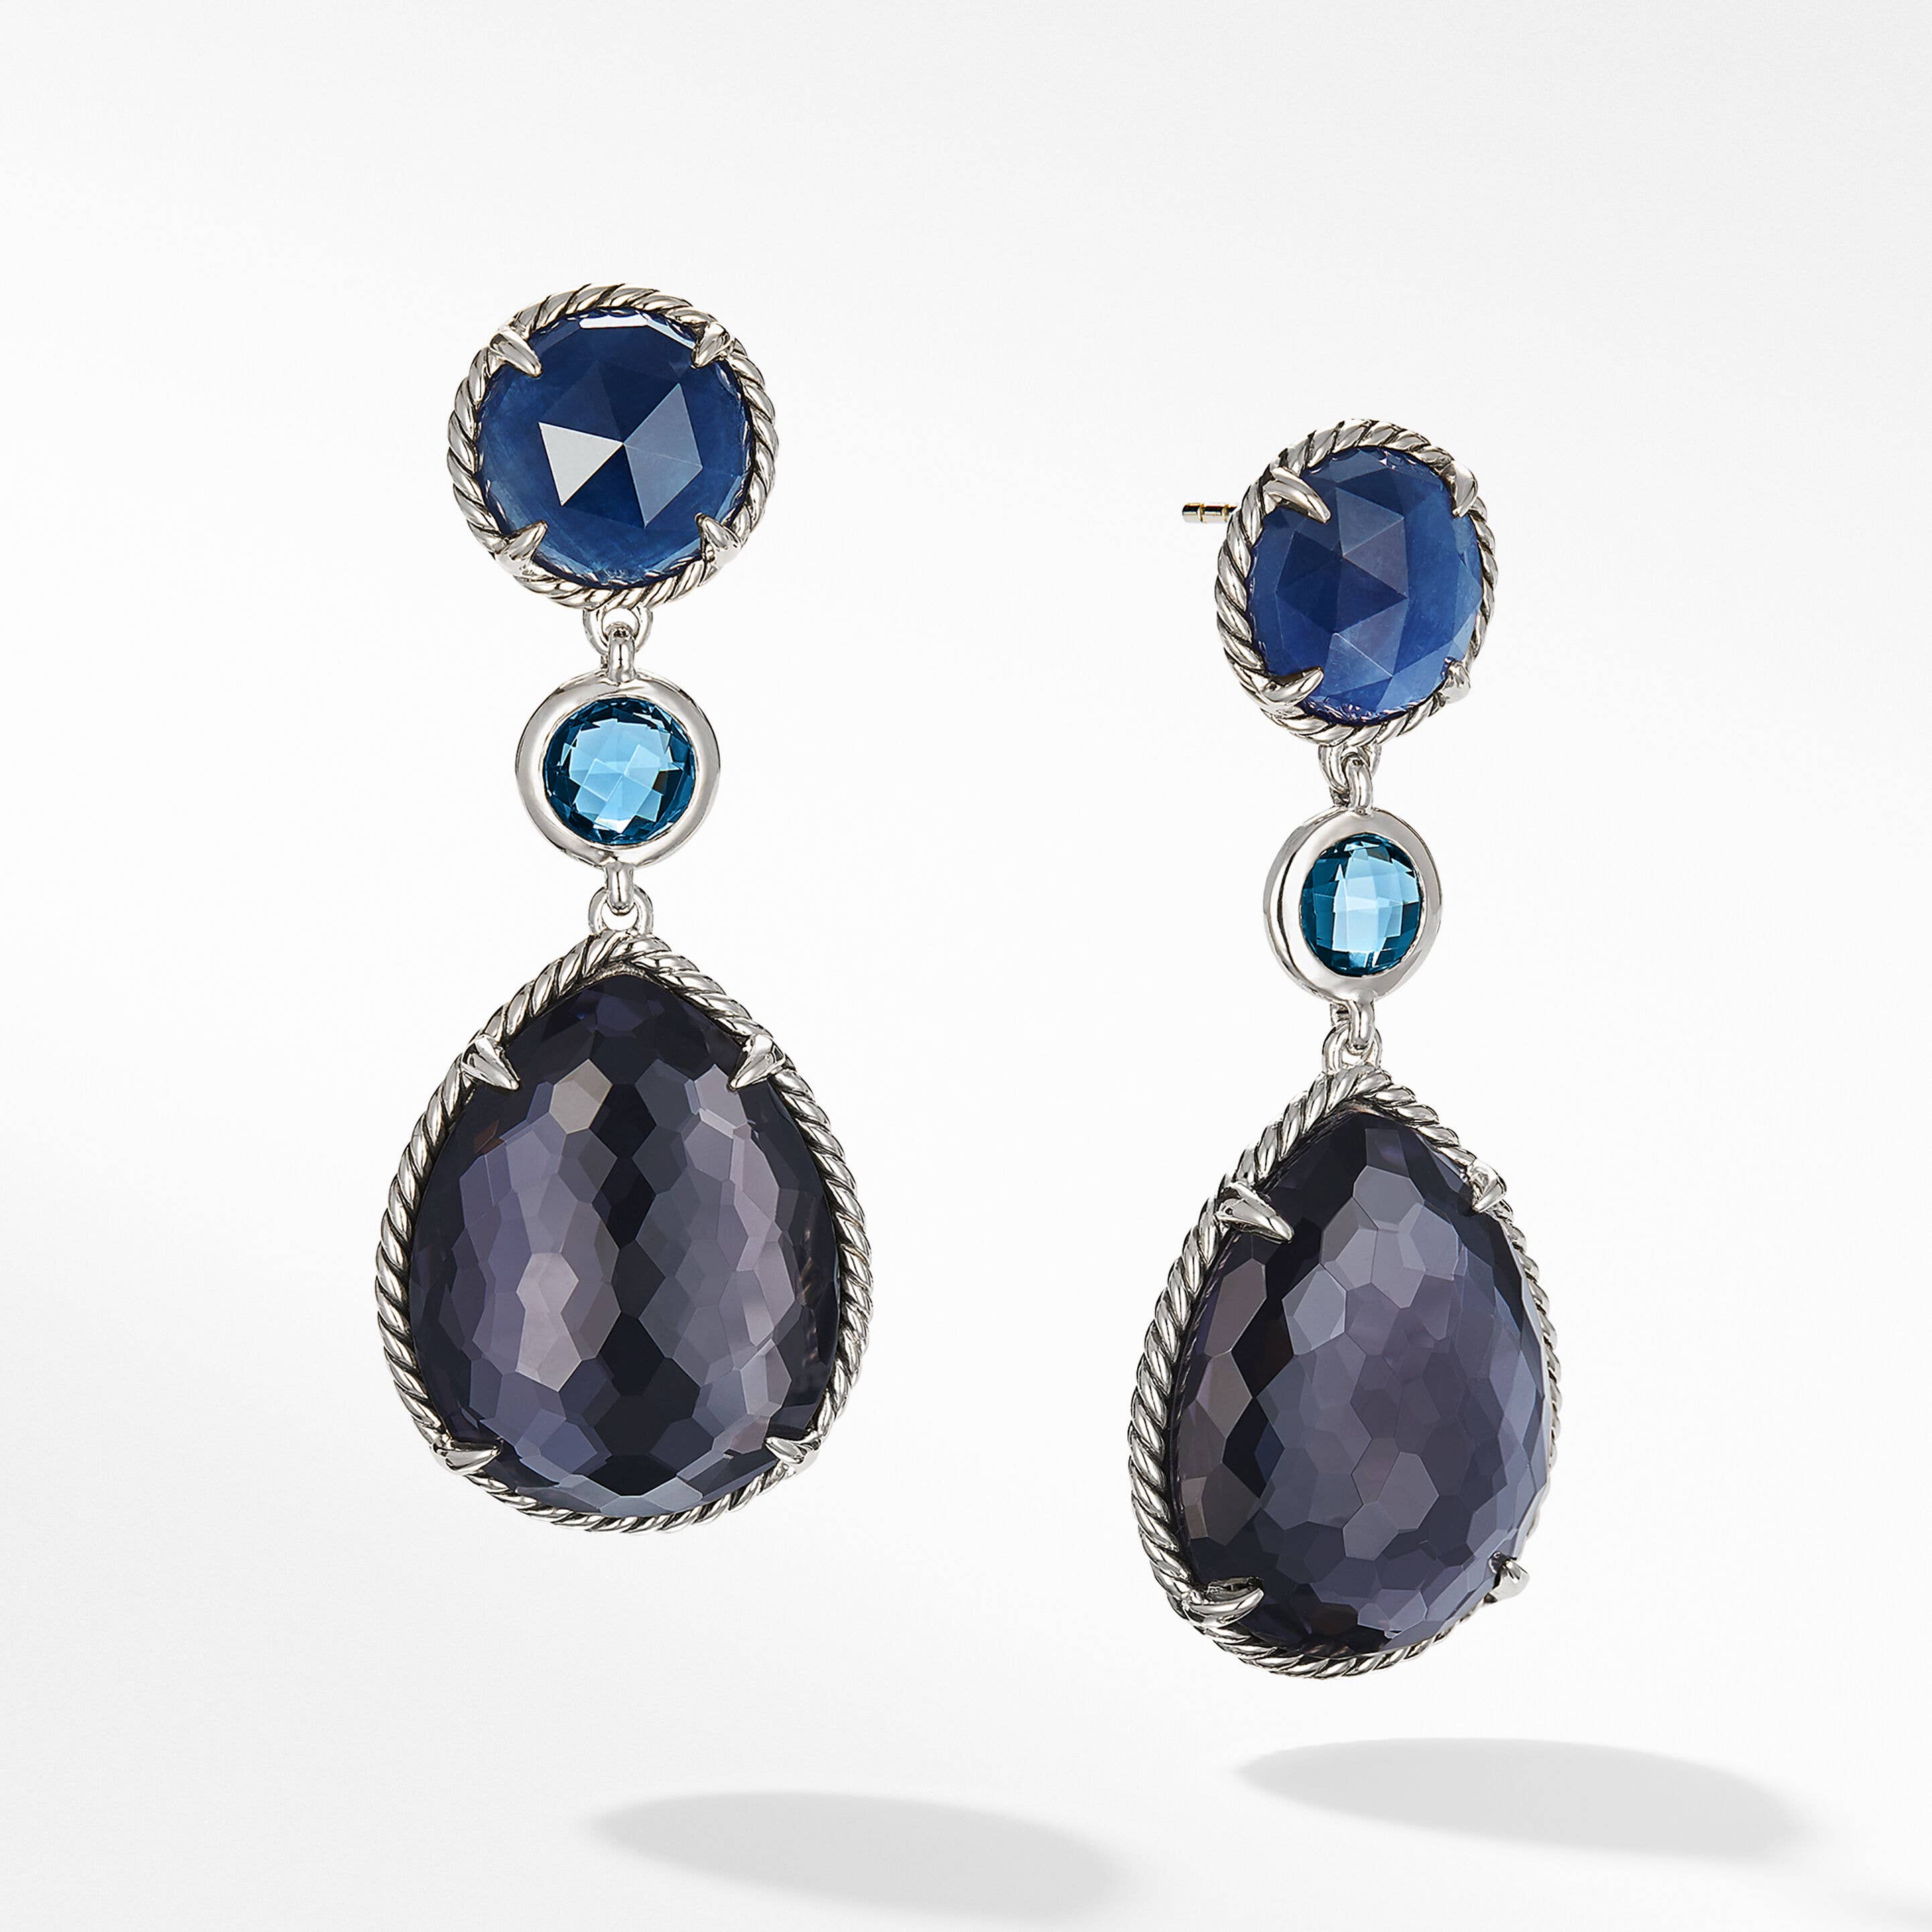 Chatelaine® Teardrop Earrings in Sterling Silver with Black Orchid, Indian Blue Sapphire and Hampton Blue Topaz